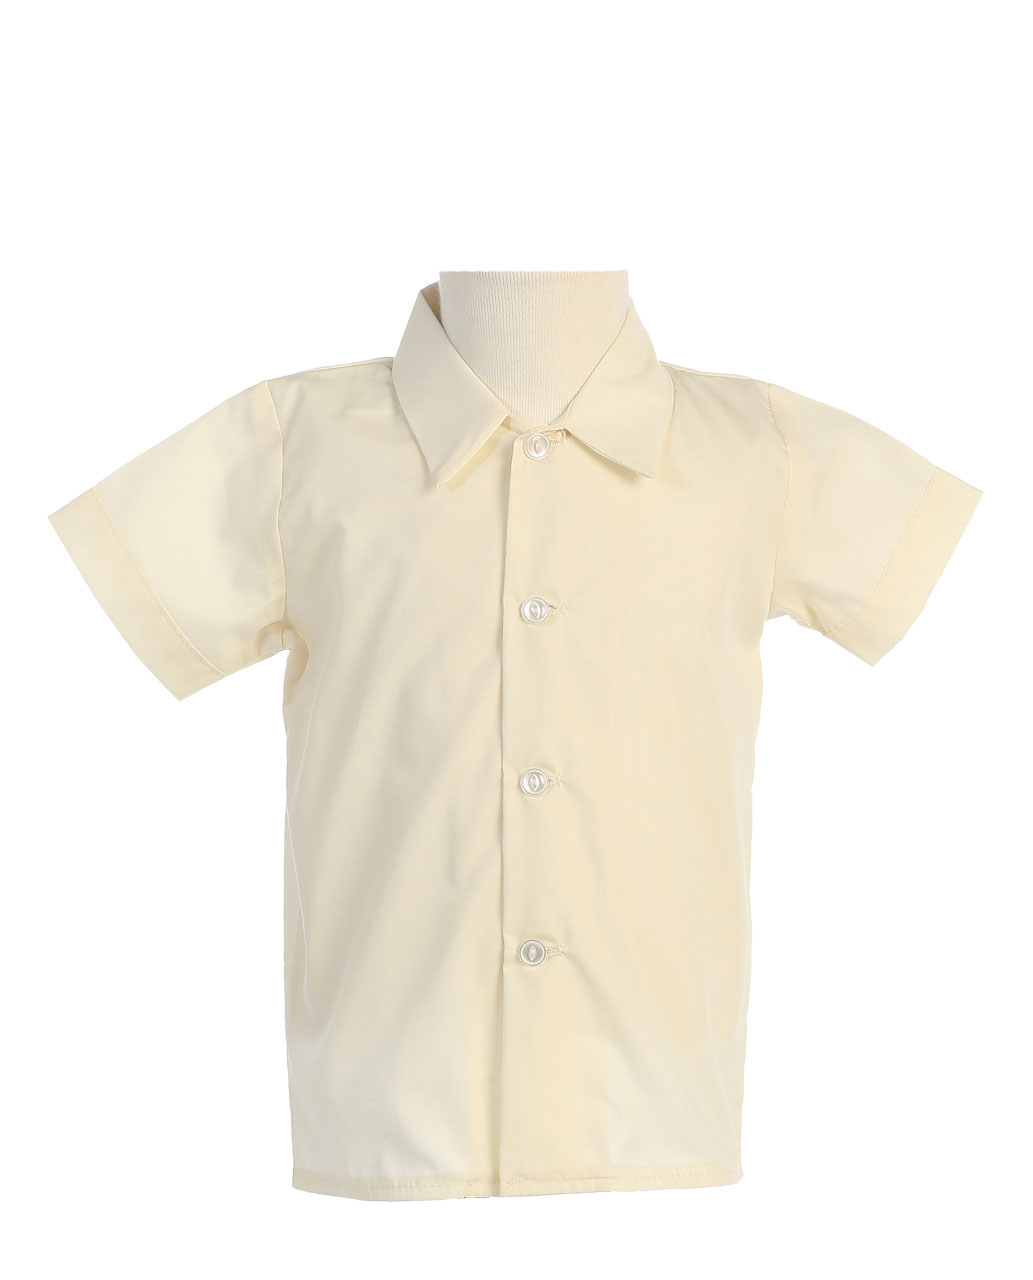 Boys Short Sleeved Simple Dress Shirt - Available in Ivory 2T